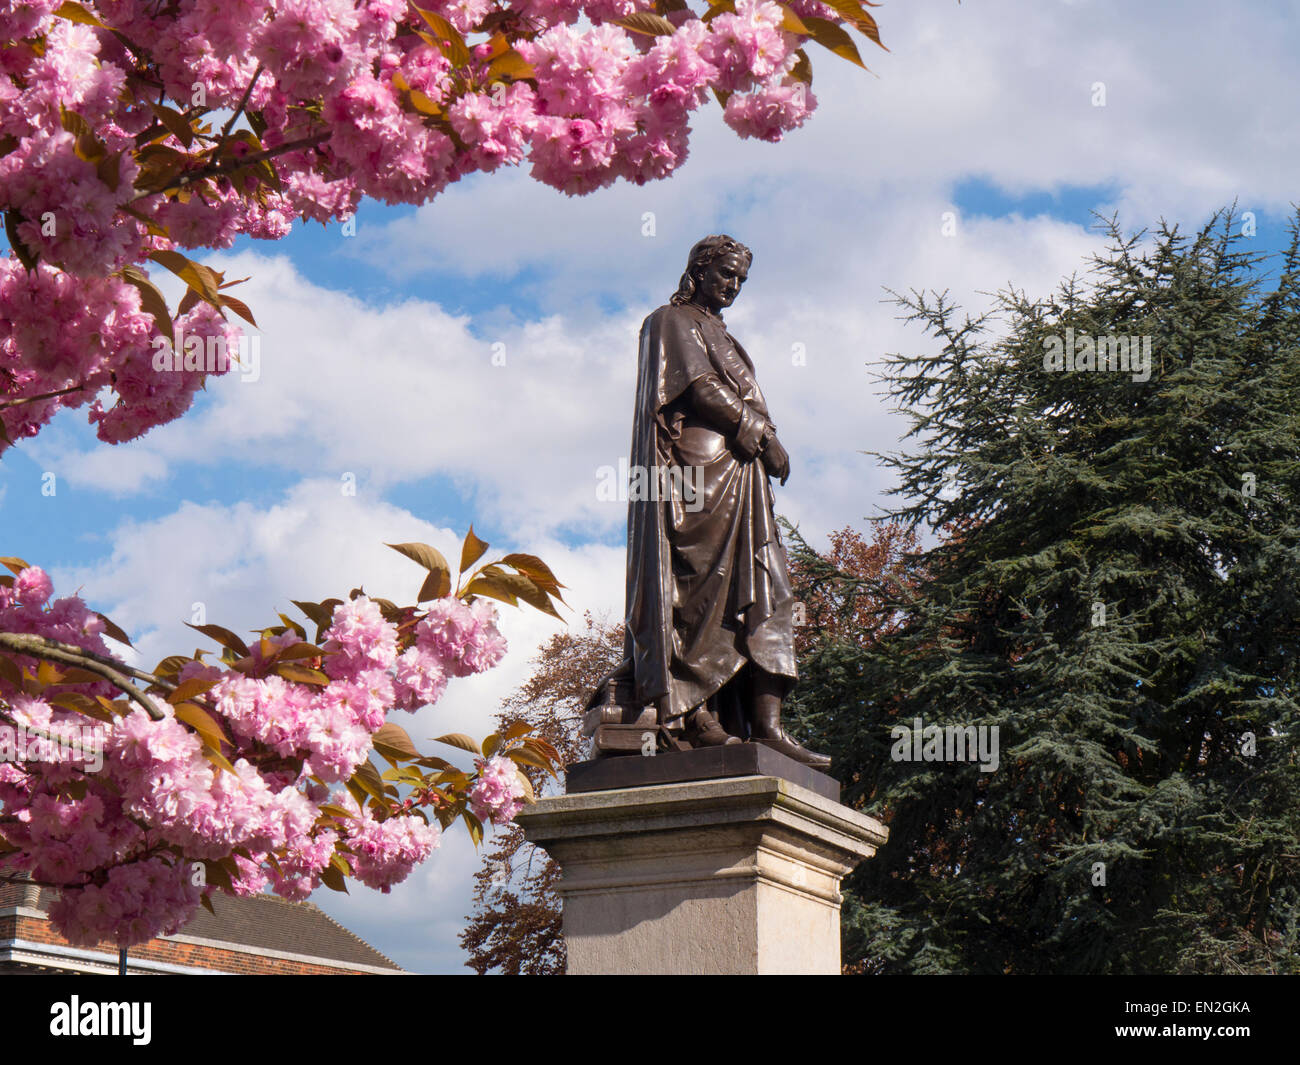 Statue de Sir Isaac Newton, Grantham, Lincolnshire, Angleterre, RU Banque D'Images